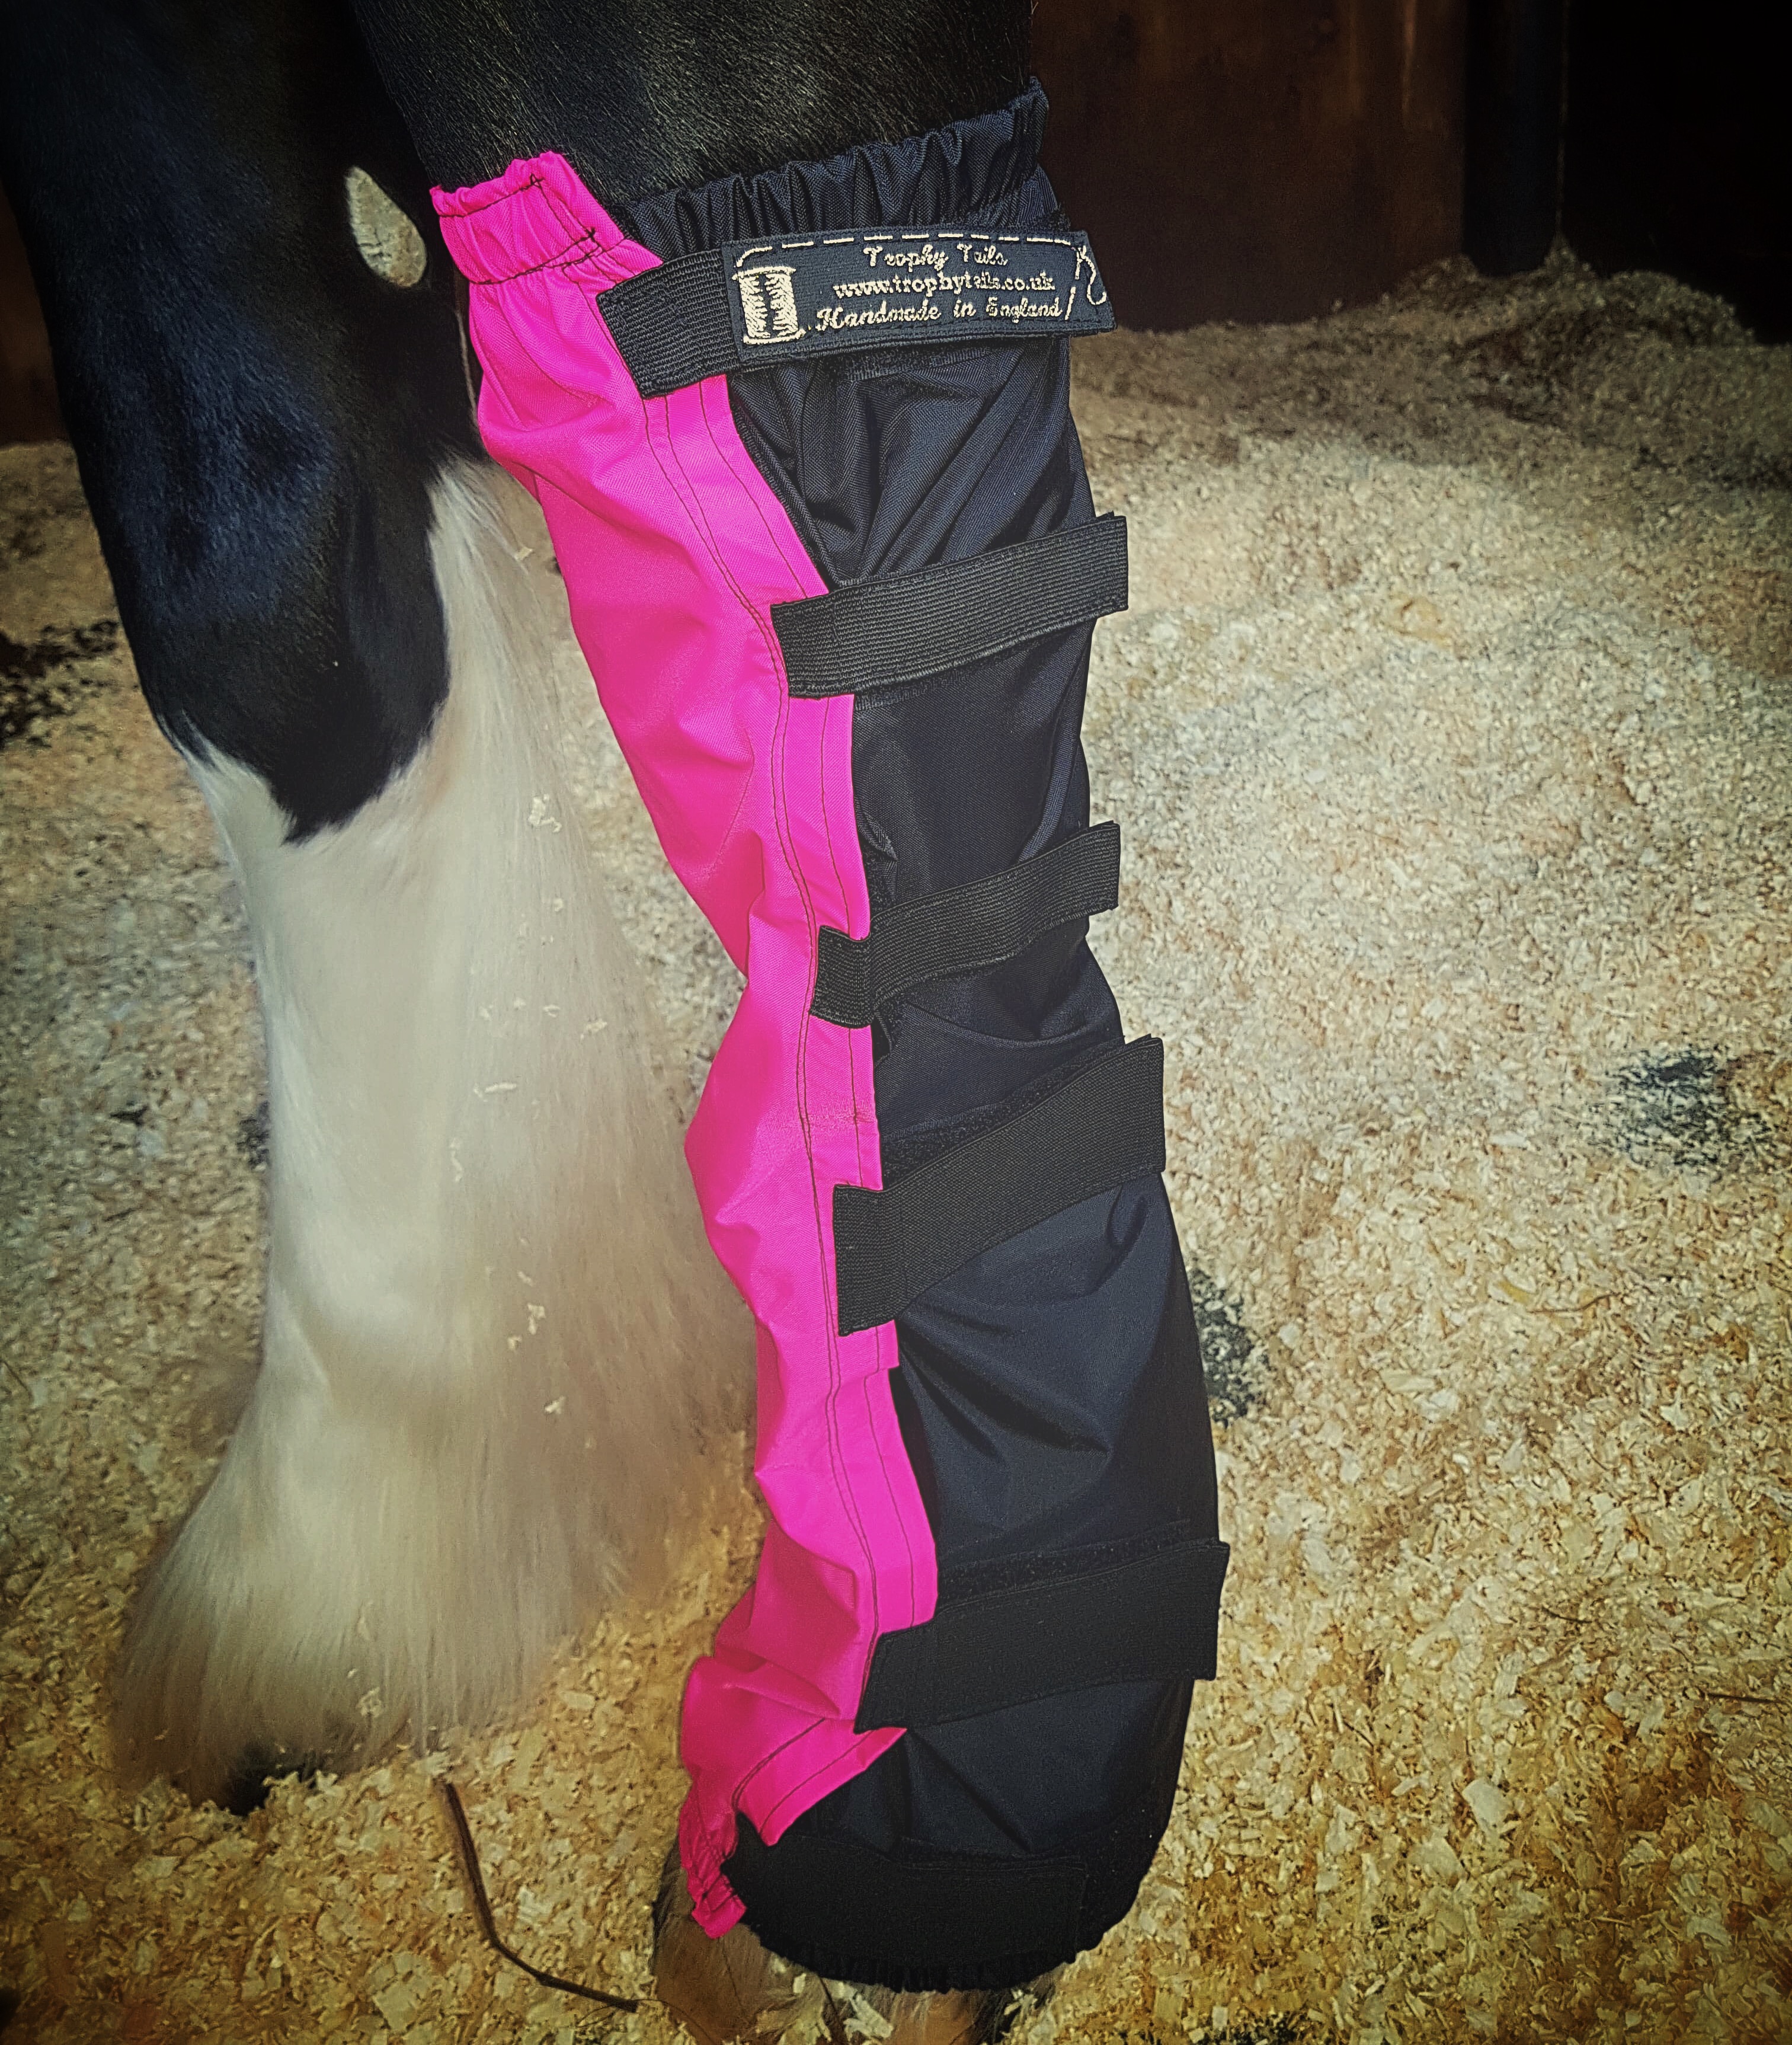 Waterproof Feather Boot set of 2 fronts - Black & Pink